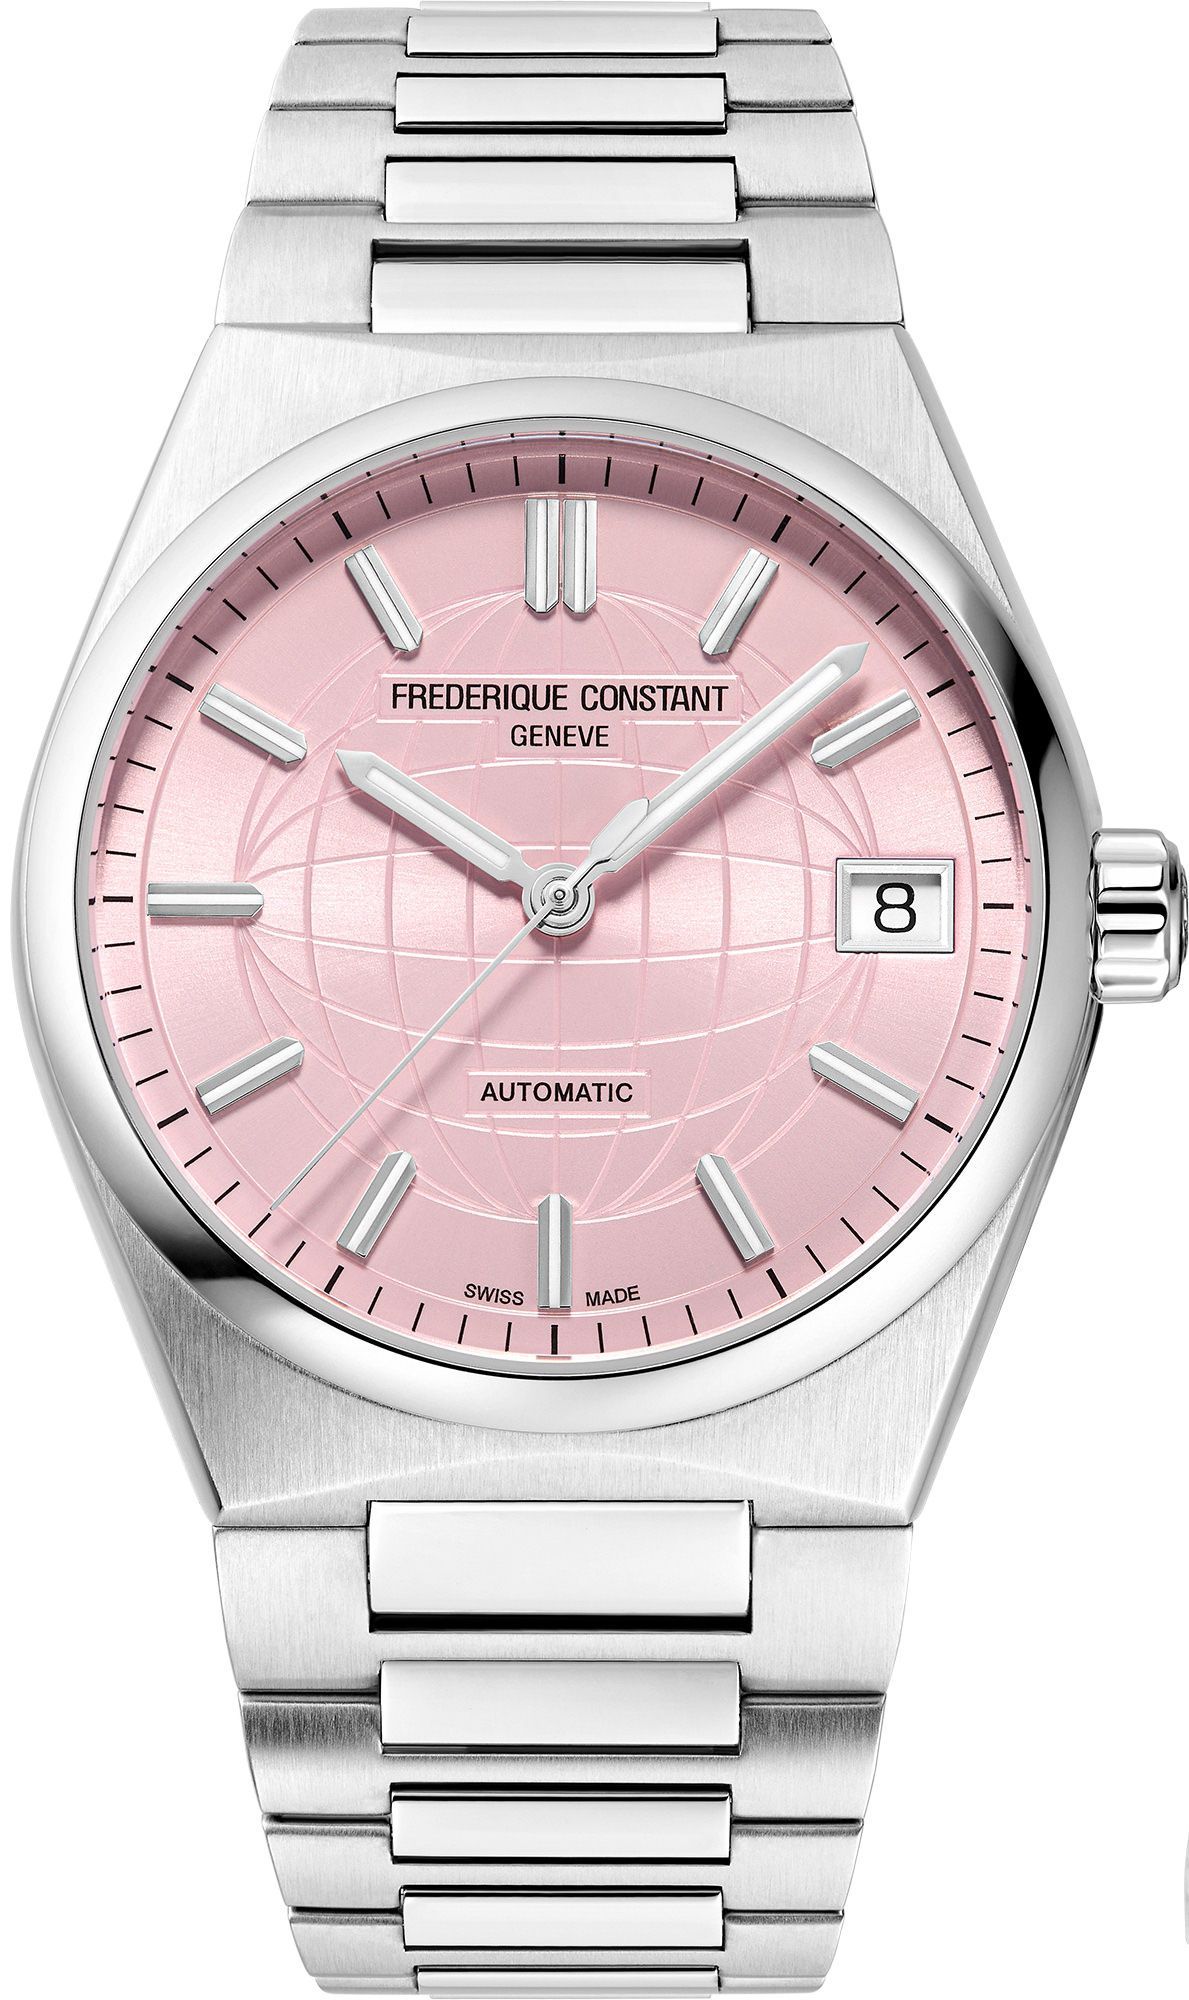 Frederique Constant Highlife Highlife Automatic COSC Pink Dial 41 mm Automatic Watch For Women - 1